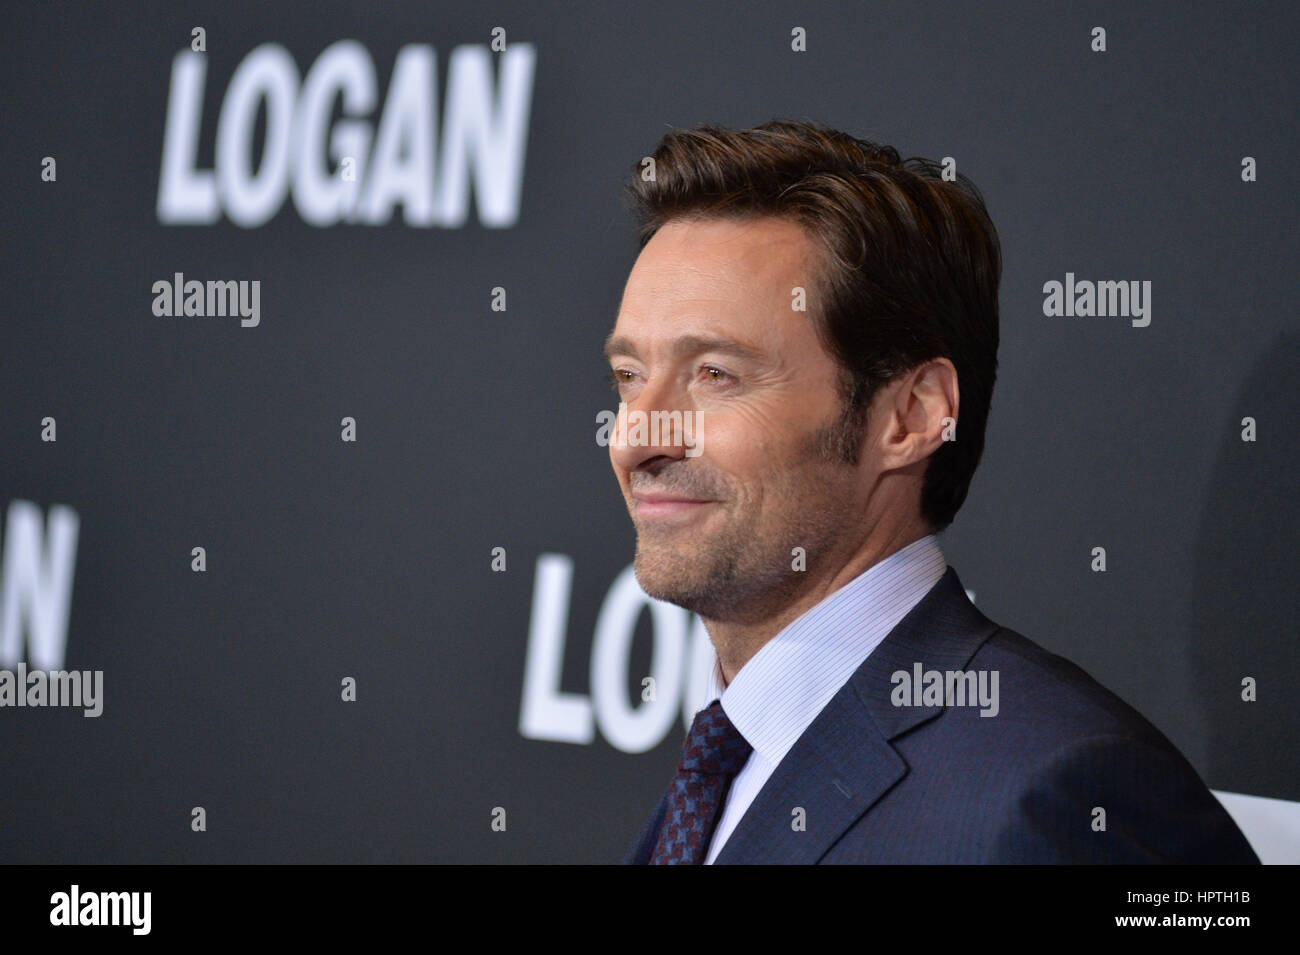 New York, USA. 24 Feb 2017. Hugh Jackman attends the 'Logan' New York special screening at Rose Theater, Jazz at Lincoln Center on February 24, 2017 in New York City.  credit:  Erik Pendzich/Alamy Live News Stock Photo